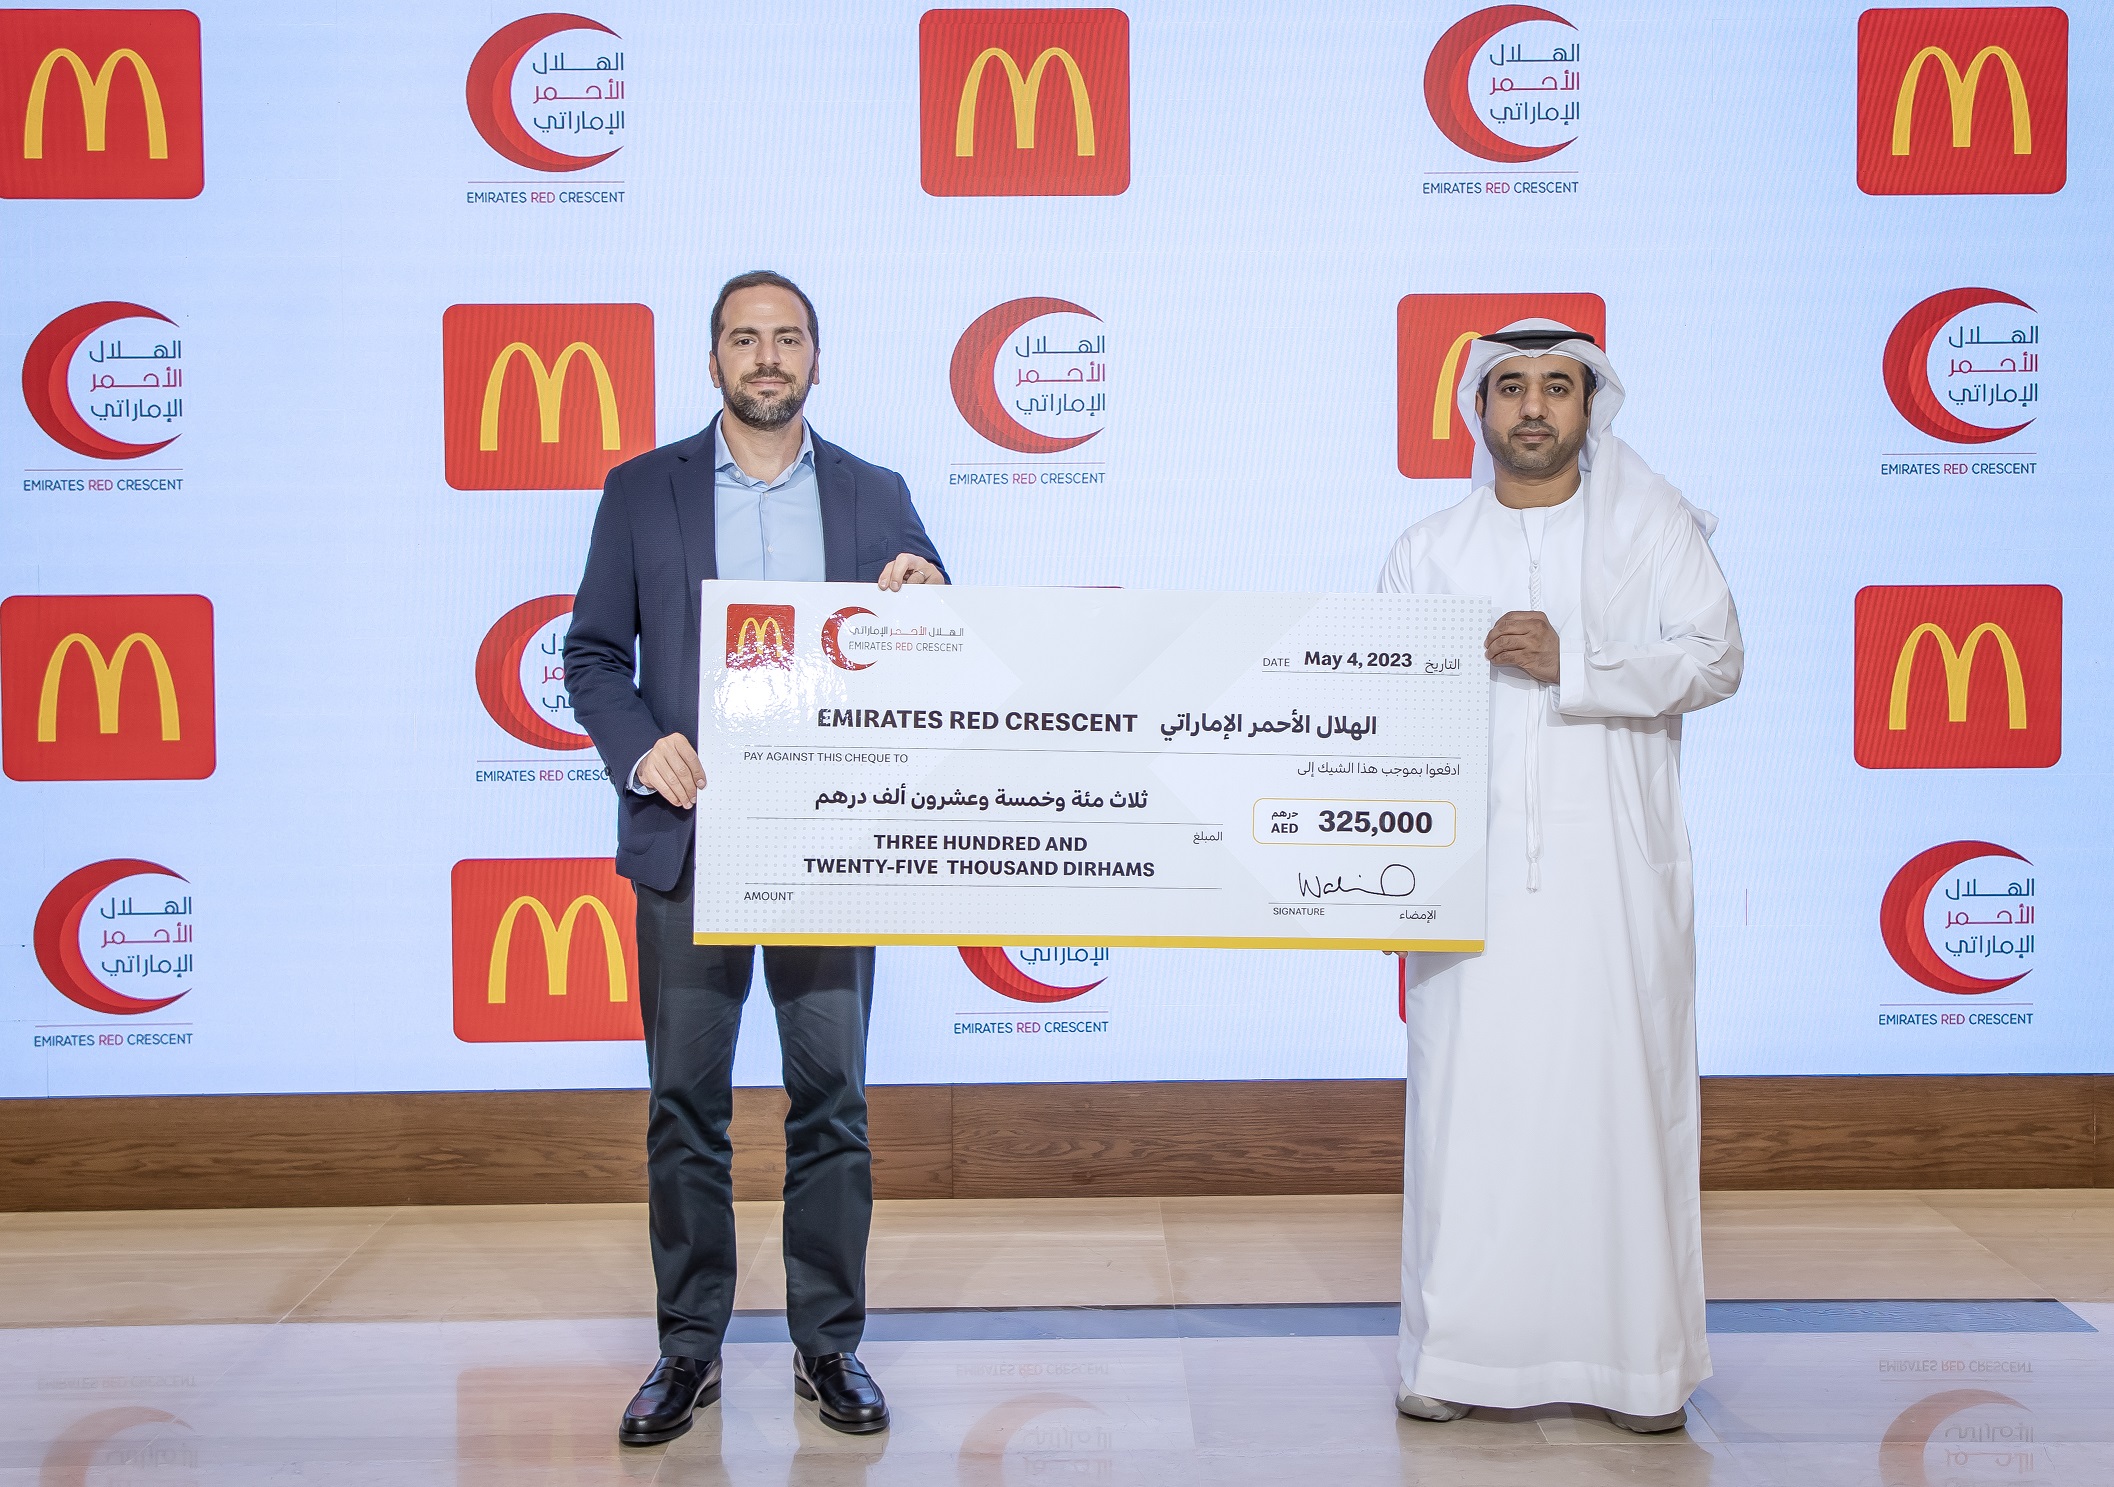 McDonald's UAE Raises AED325,000 for Emirates Red Crescent this Ramadan Through Sale of ‘The Cards for Good’